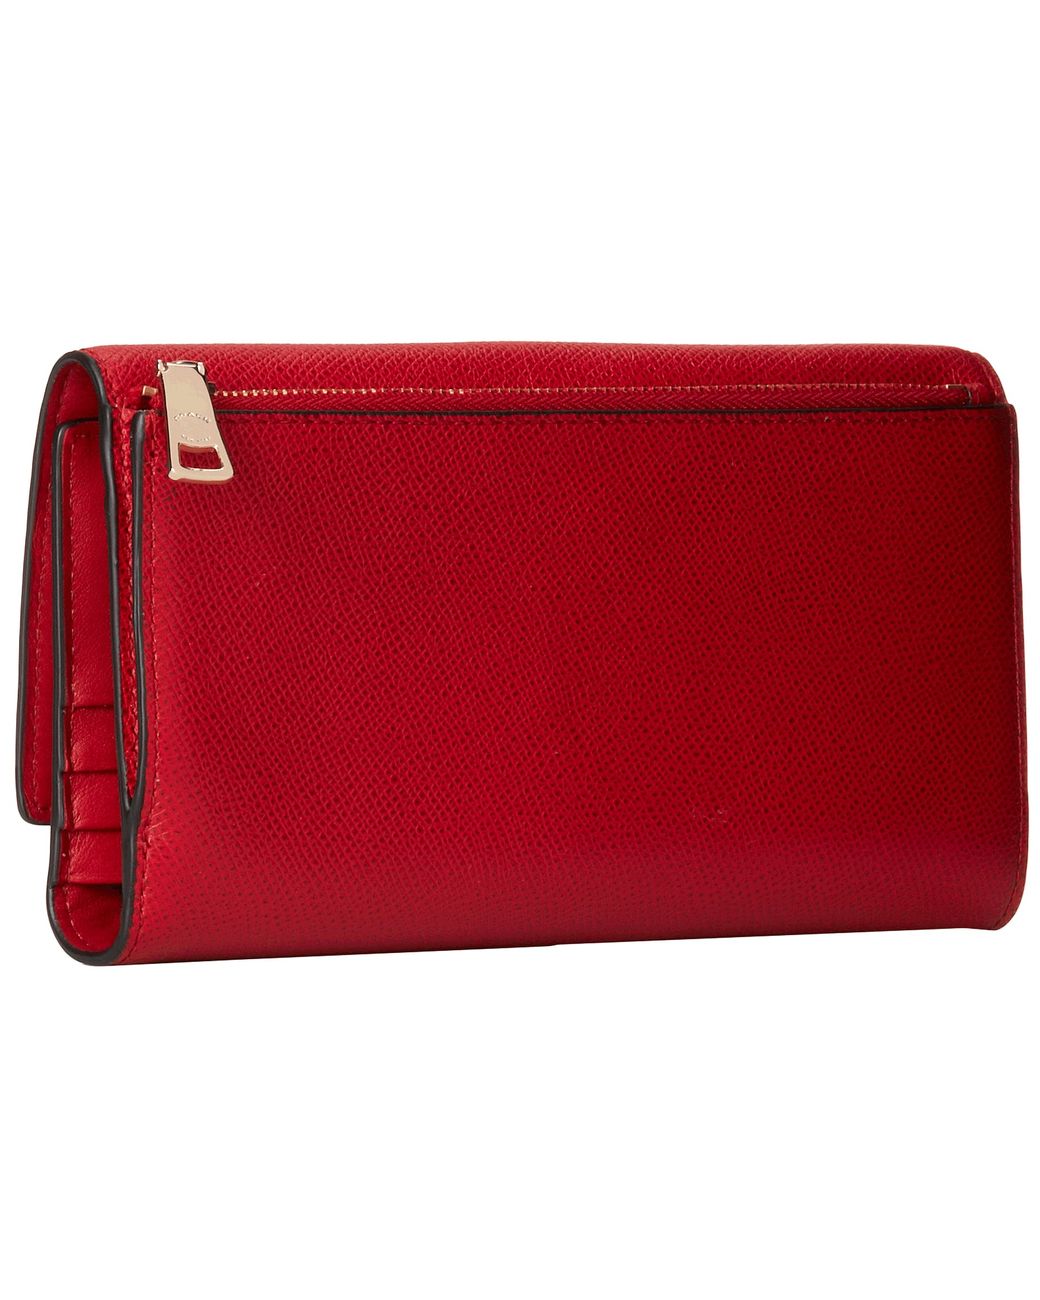 COACH Embossed Txtrd Leather Checkbook Wallet in Red | Lyst